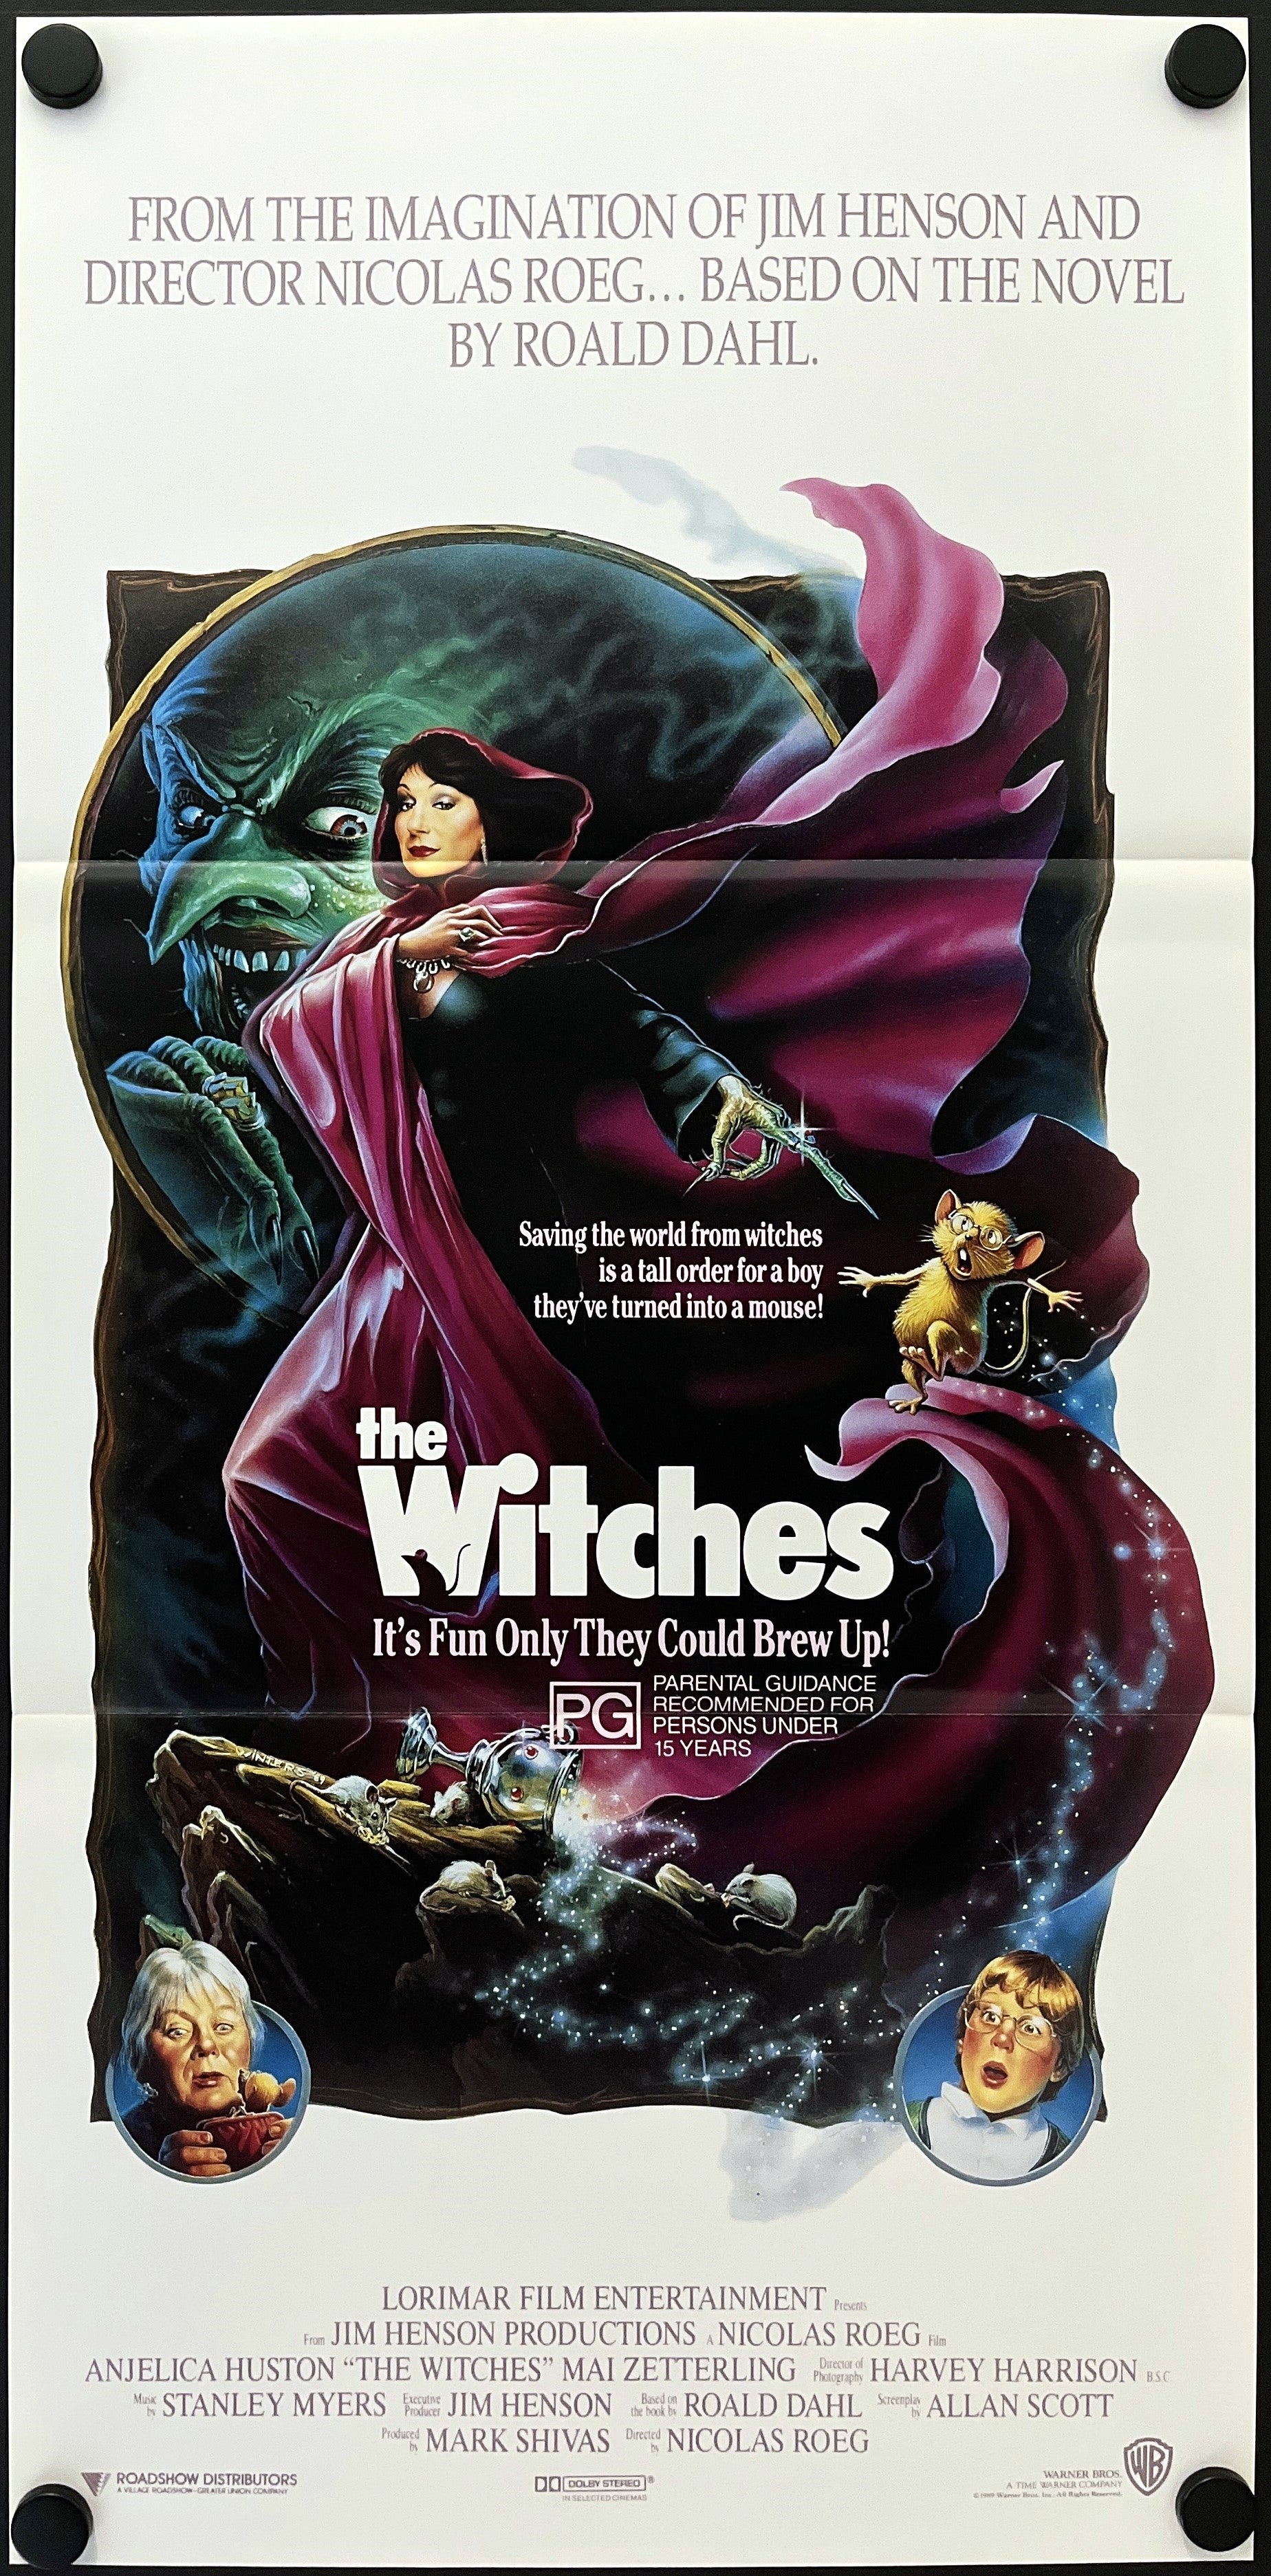 THE WITCHES (1990)